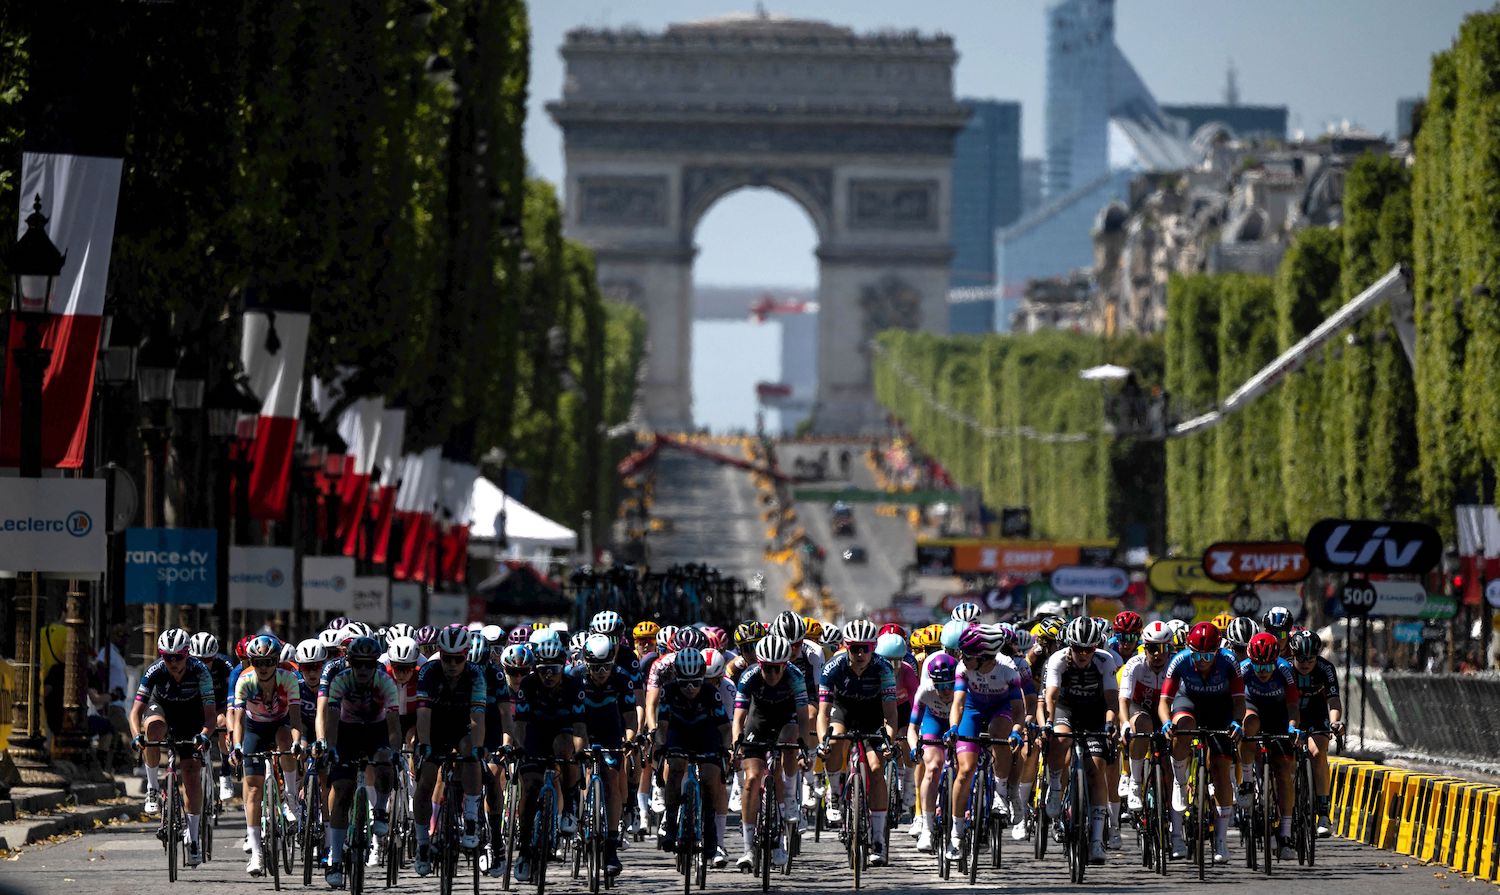 The pack rides on the Champs Elysees during the 1st stage of the new edition of the Women's Tour de France cycling race, 81,6 km between the Tour Eiffel and the Champs-Elysees, in Paris on July 24, 2022. (Photo by JEFF PACHOUD / AFP) (Photo by JEFF PACHOUD/AFP via Getty Images)